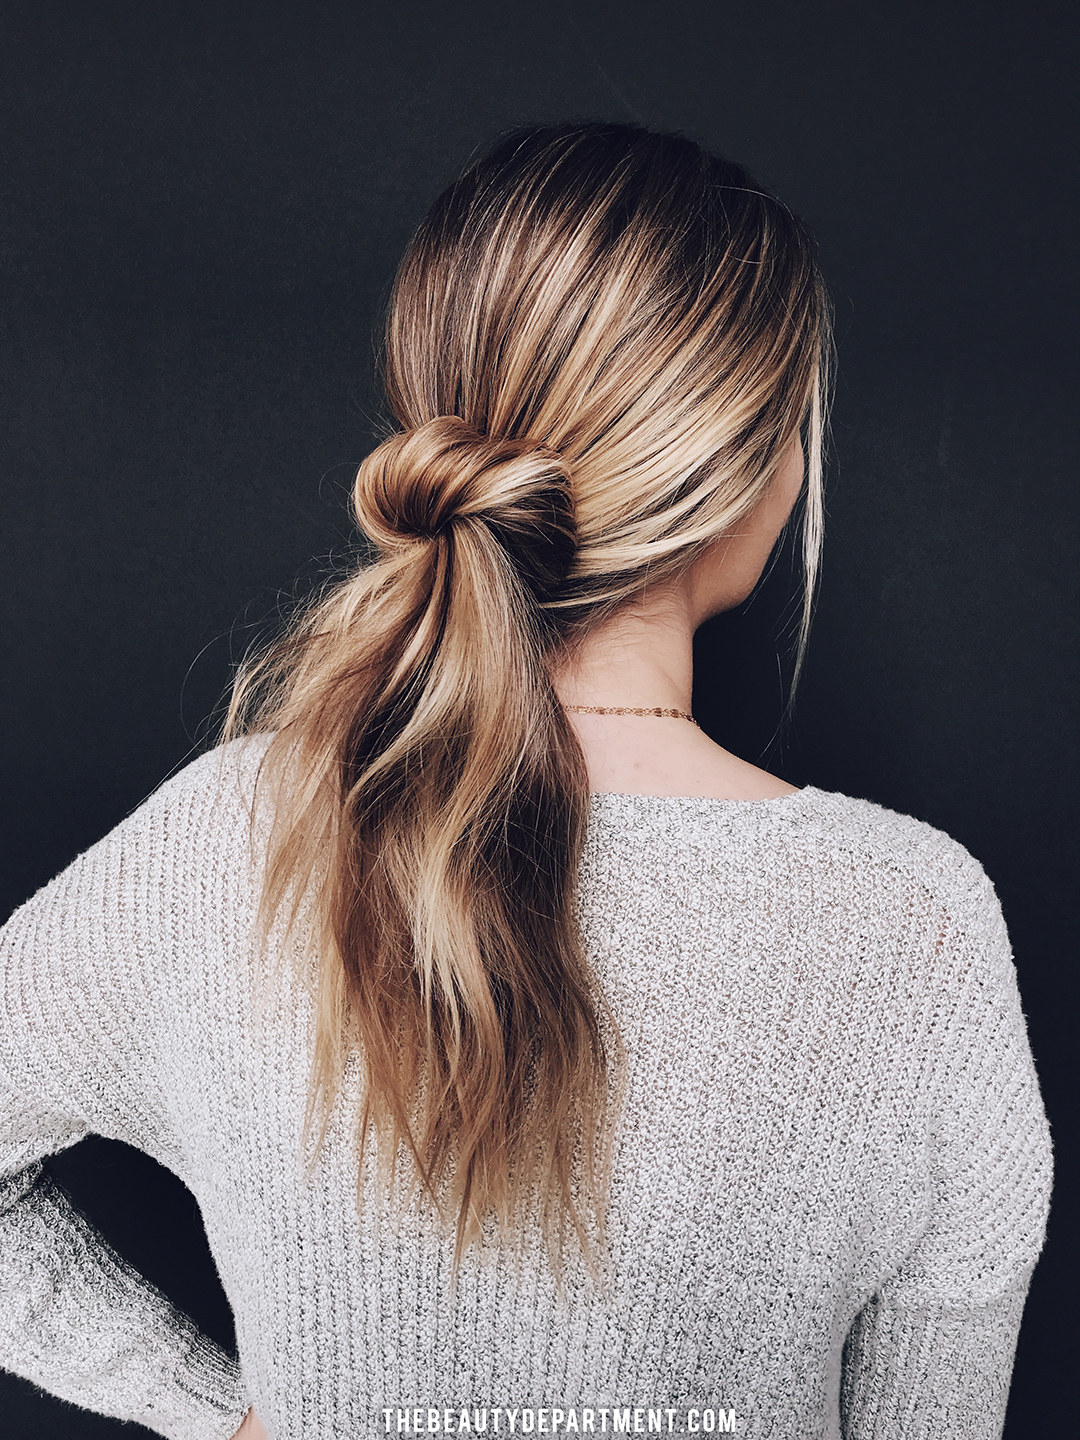 Trendiest Updos For Medium Length Hair To Inspire New Looks : Pretty blonde  updo